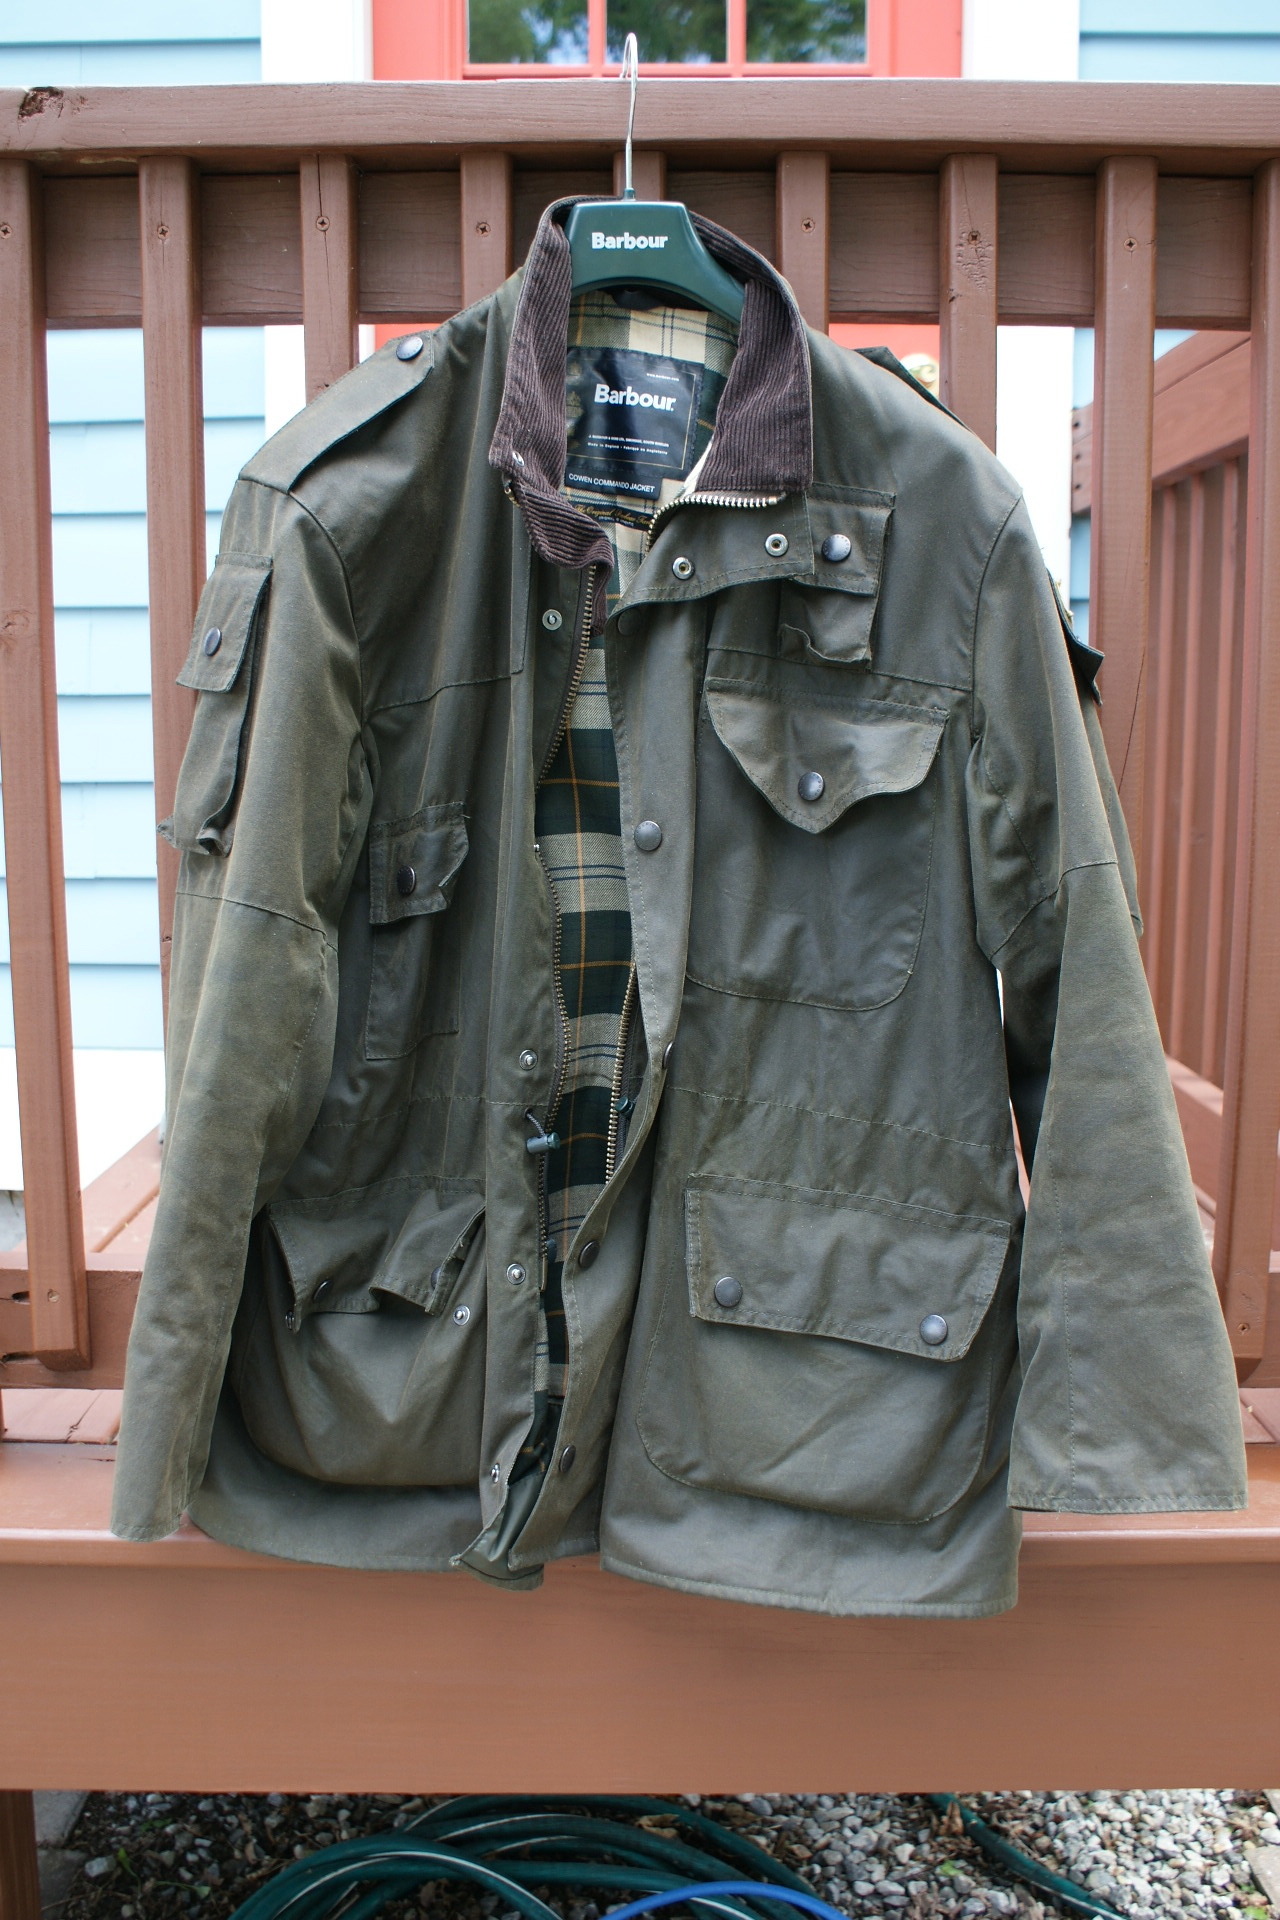 cheap barbour jackets ebay